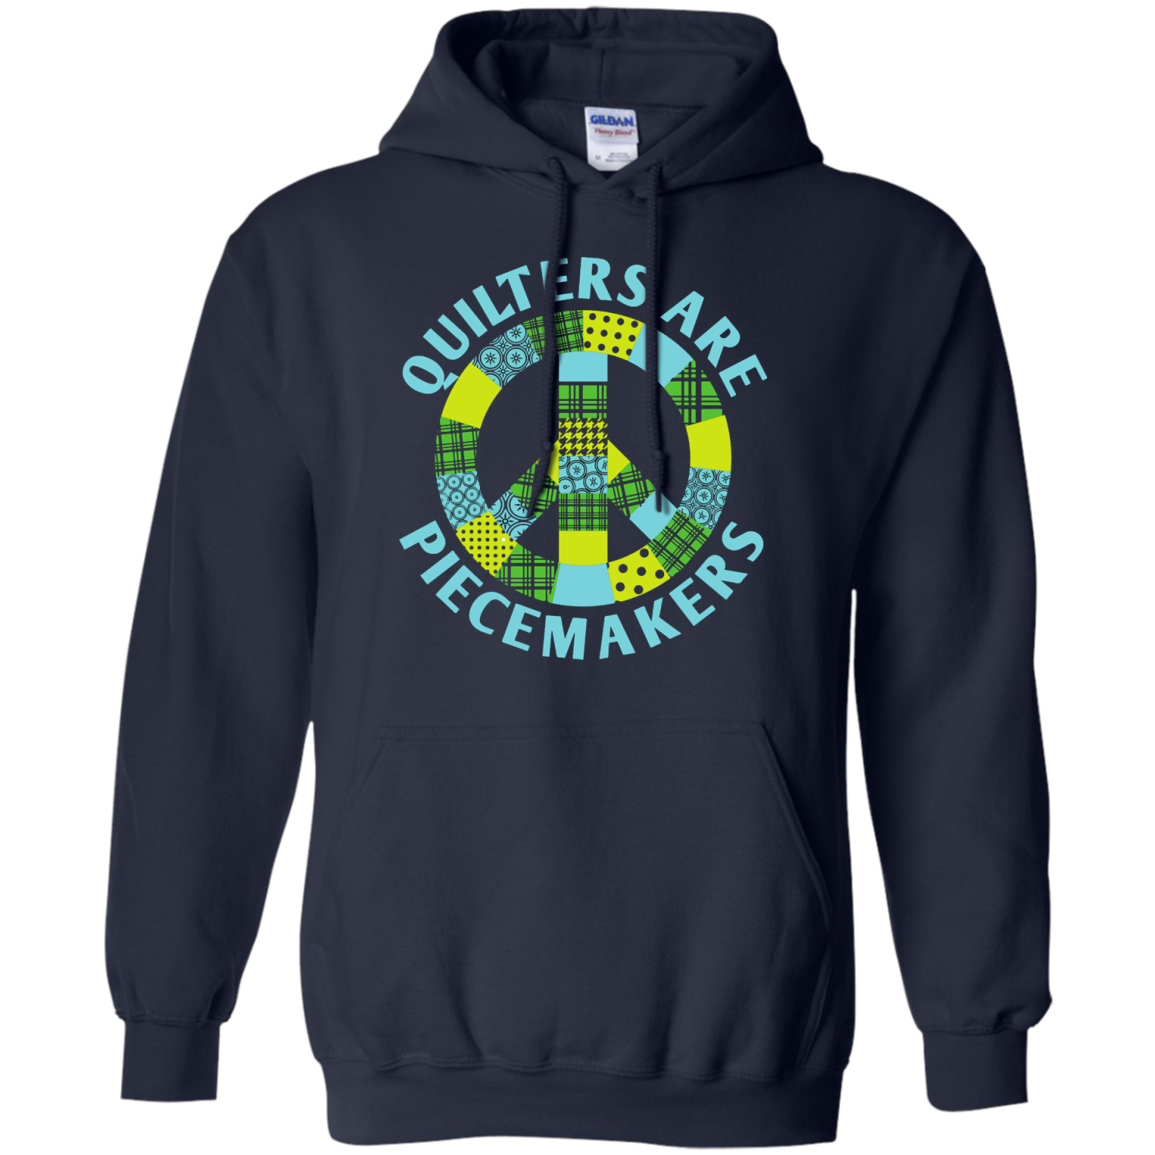 Quilters are Piecemakers Pullover Hoodies - Crafter4Life - 2